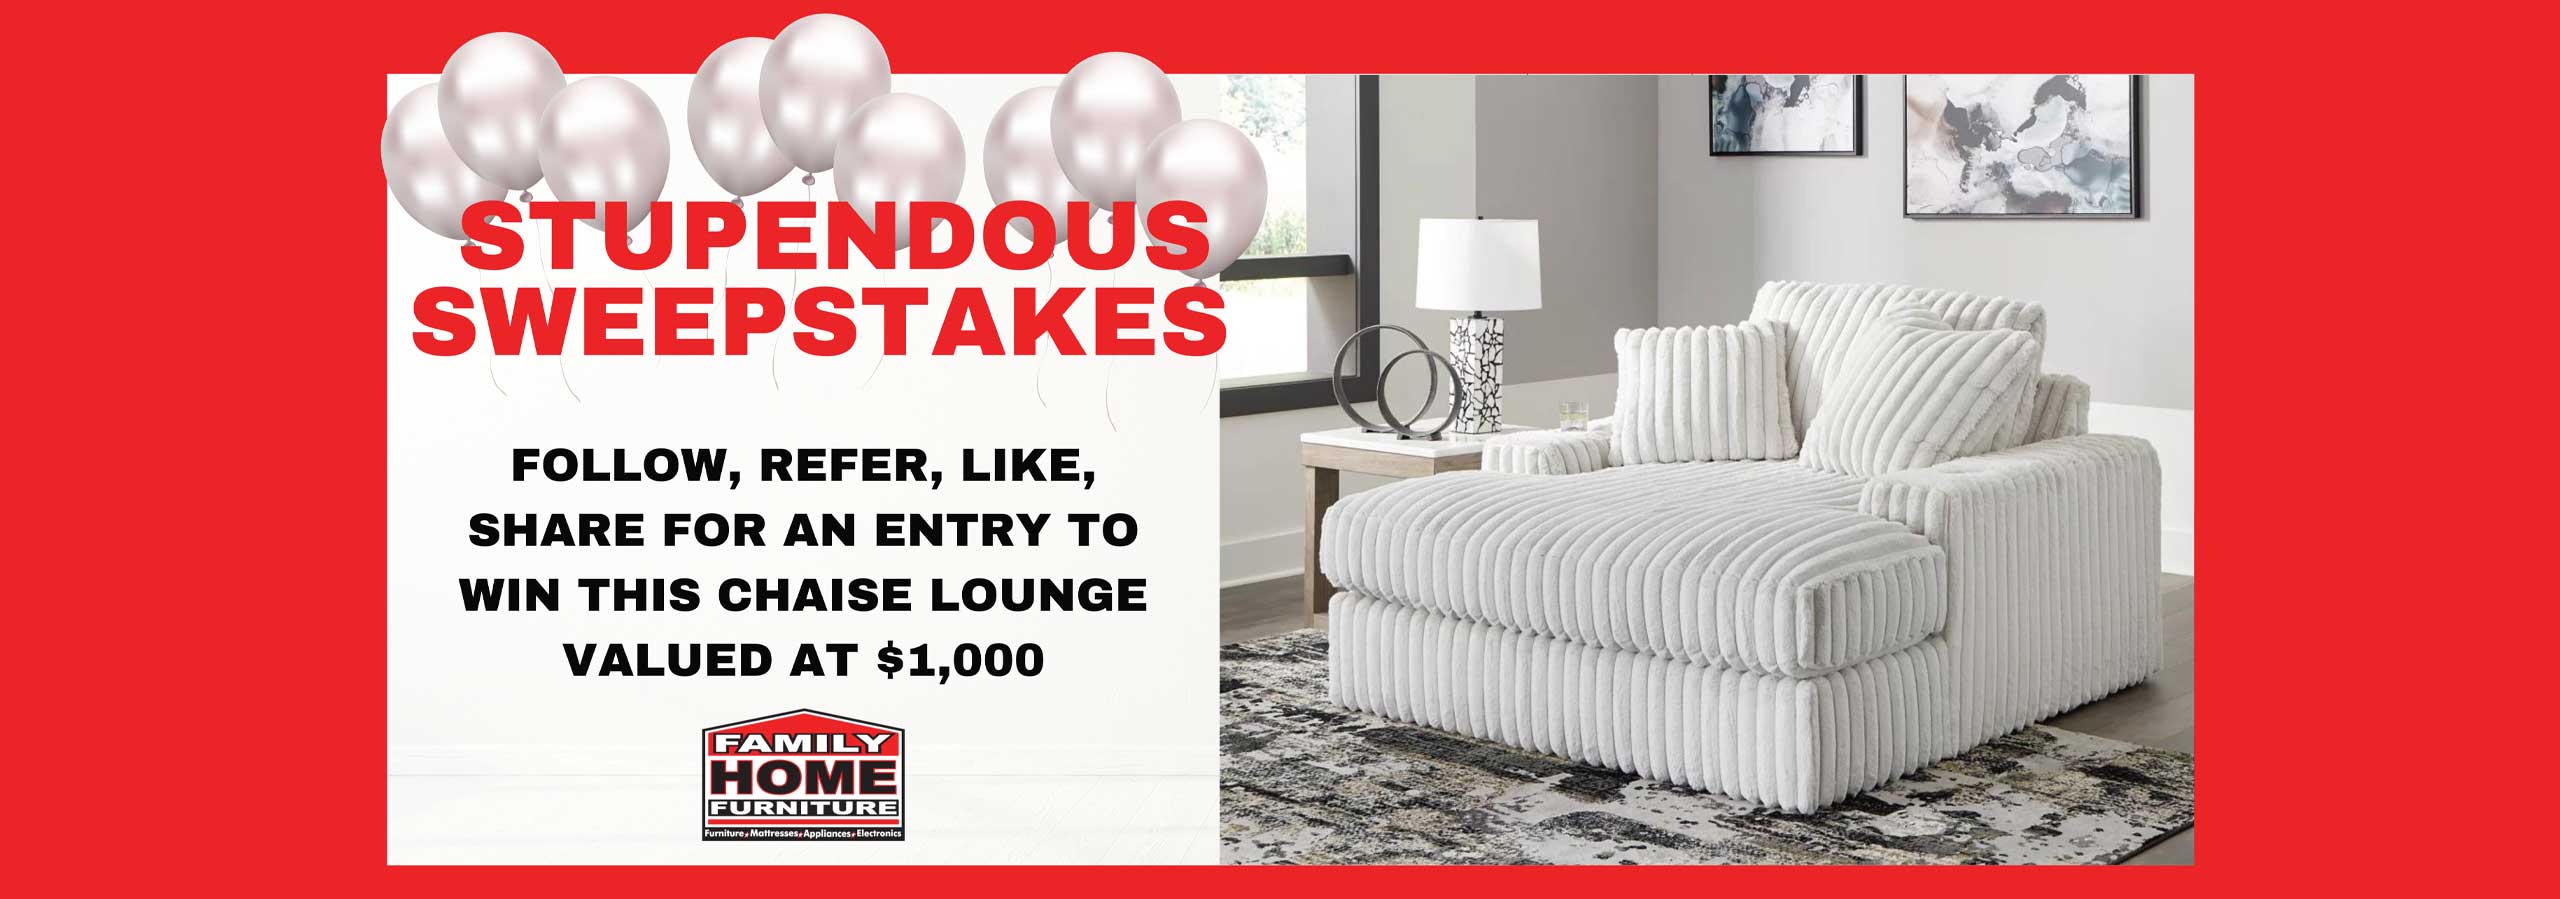 Stupendous Sweepstakes - Contact Us for Details